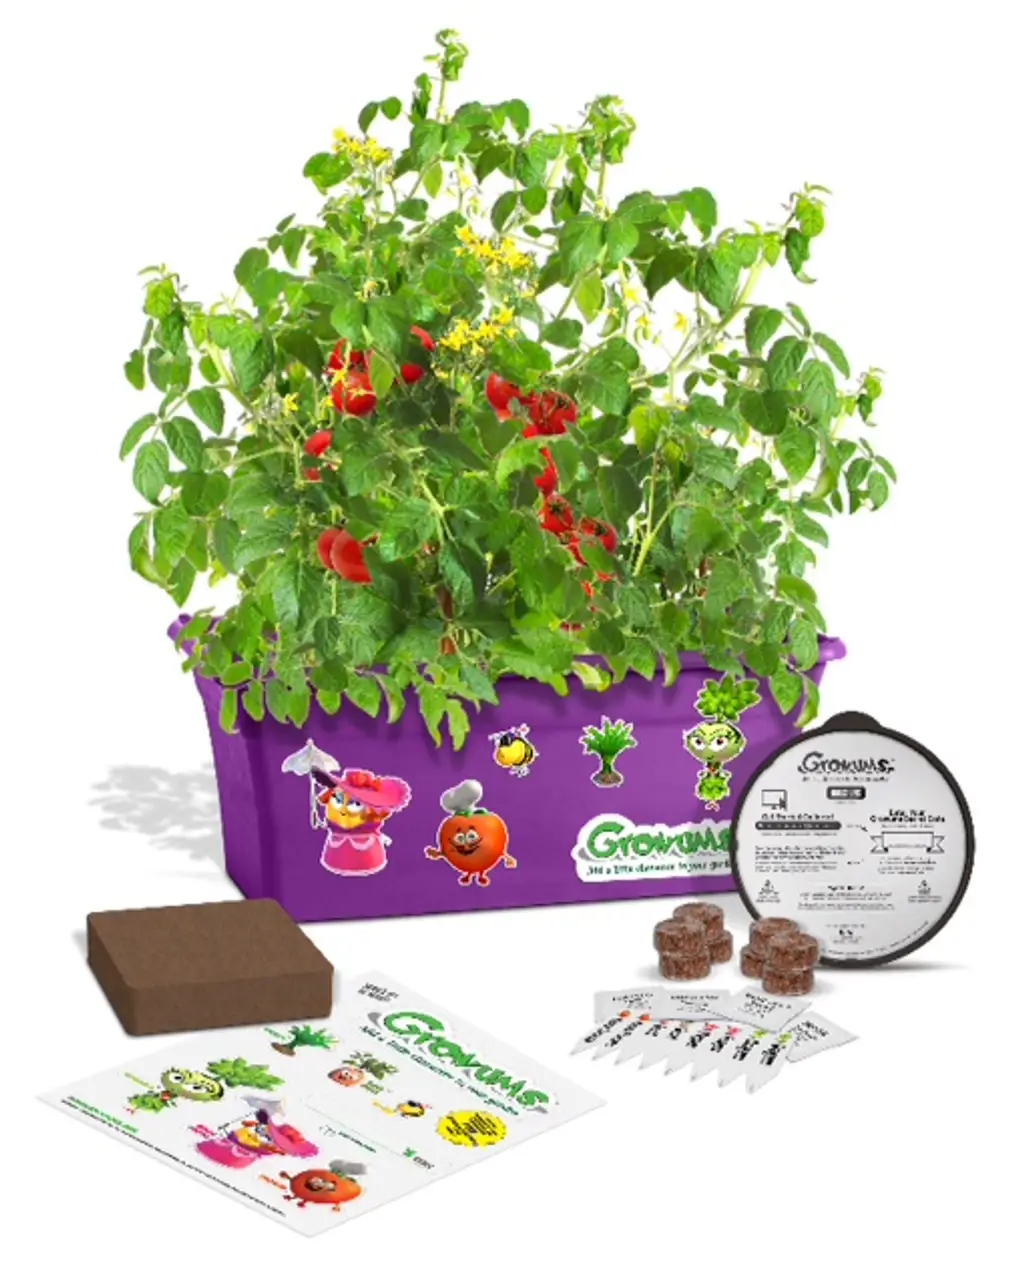 Growums Videos and Vegetable Seed Kits for Kids Growing Food